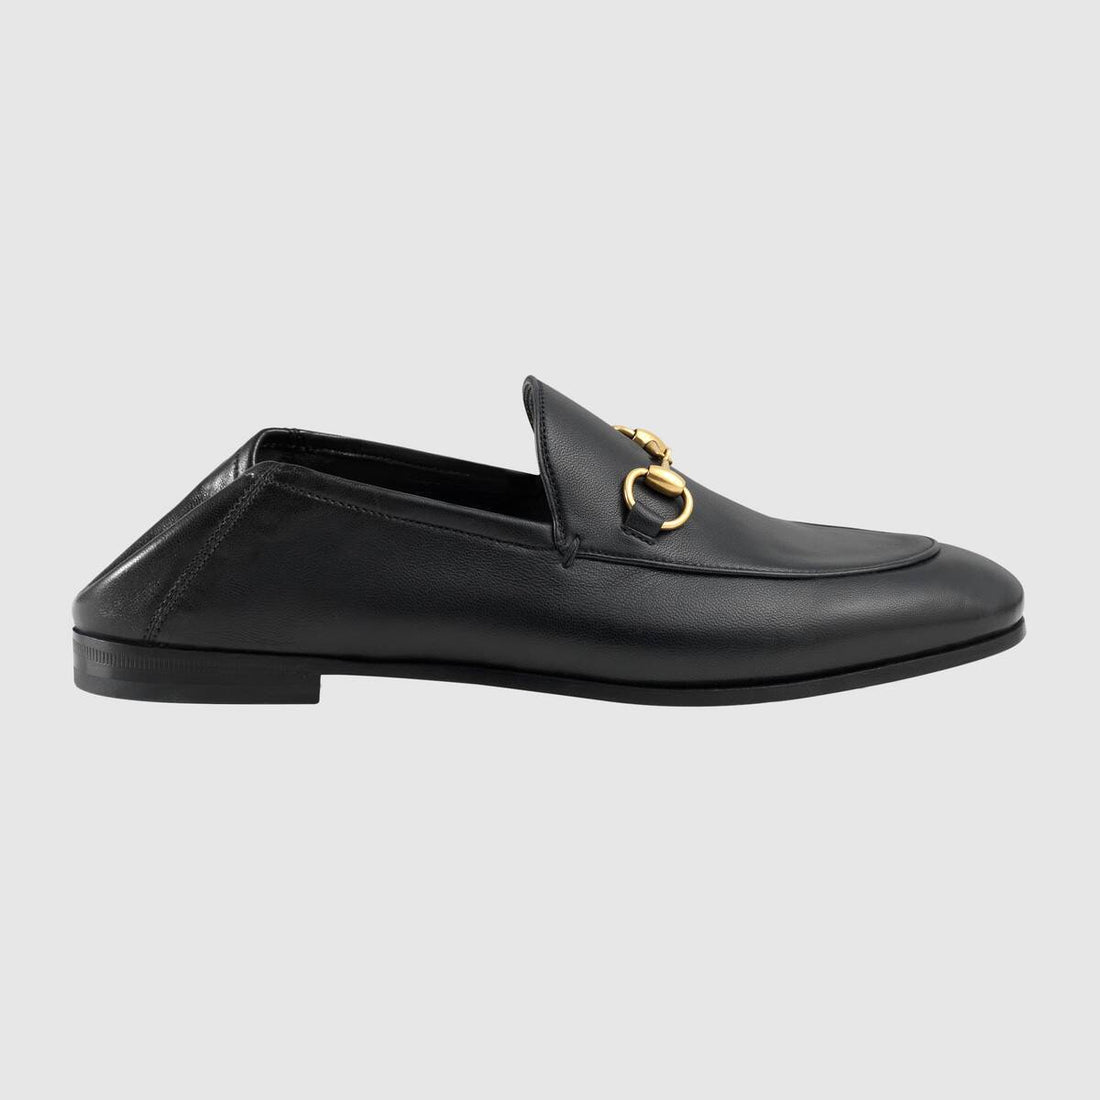 Gucci Black Smooth Leather Fold Down Horsebit Loafer - 37.5 / 7